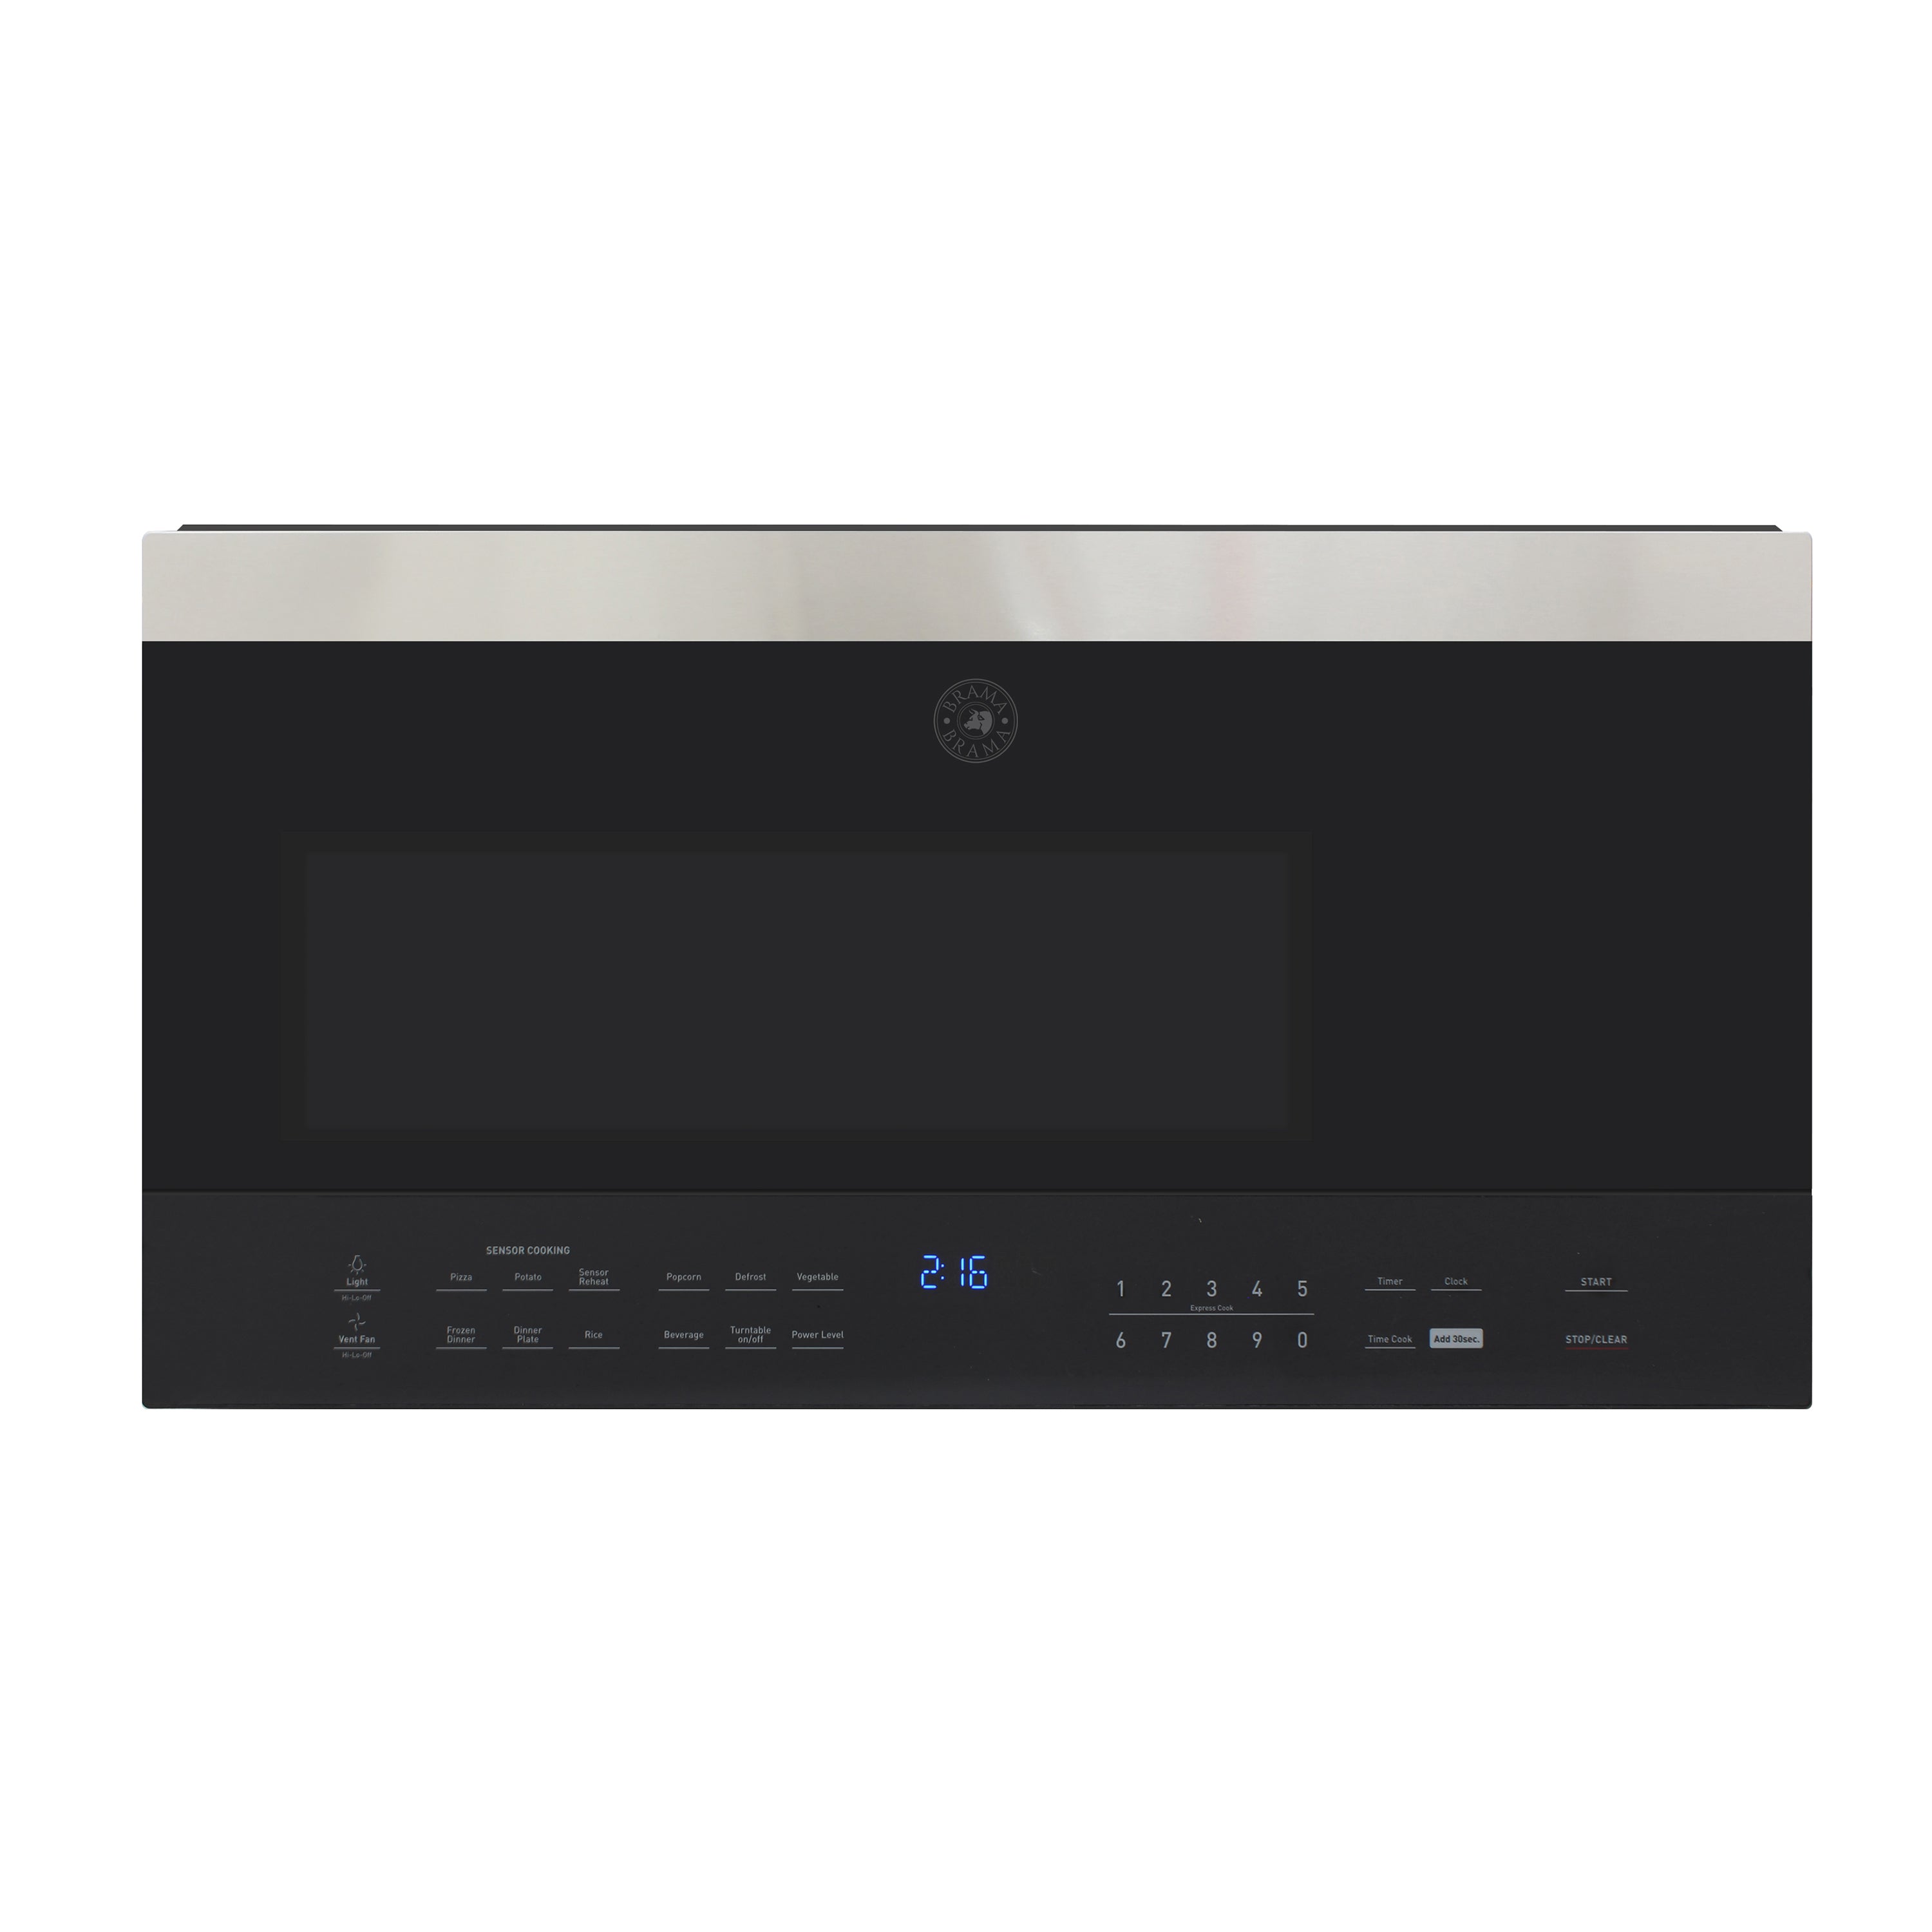 Vinotemp - BR-MW-OH16-S, Brama by Vinotemp 31" Over-the-Range Microwave Oven, 1.6 cu. ft. Capacity, in Stainless Steel